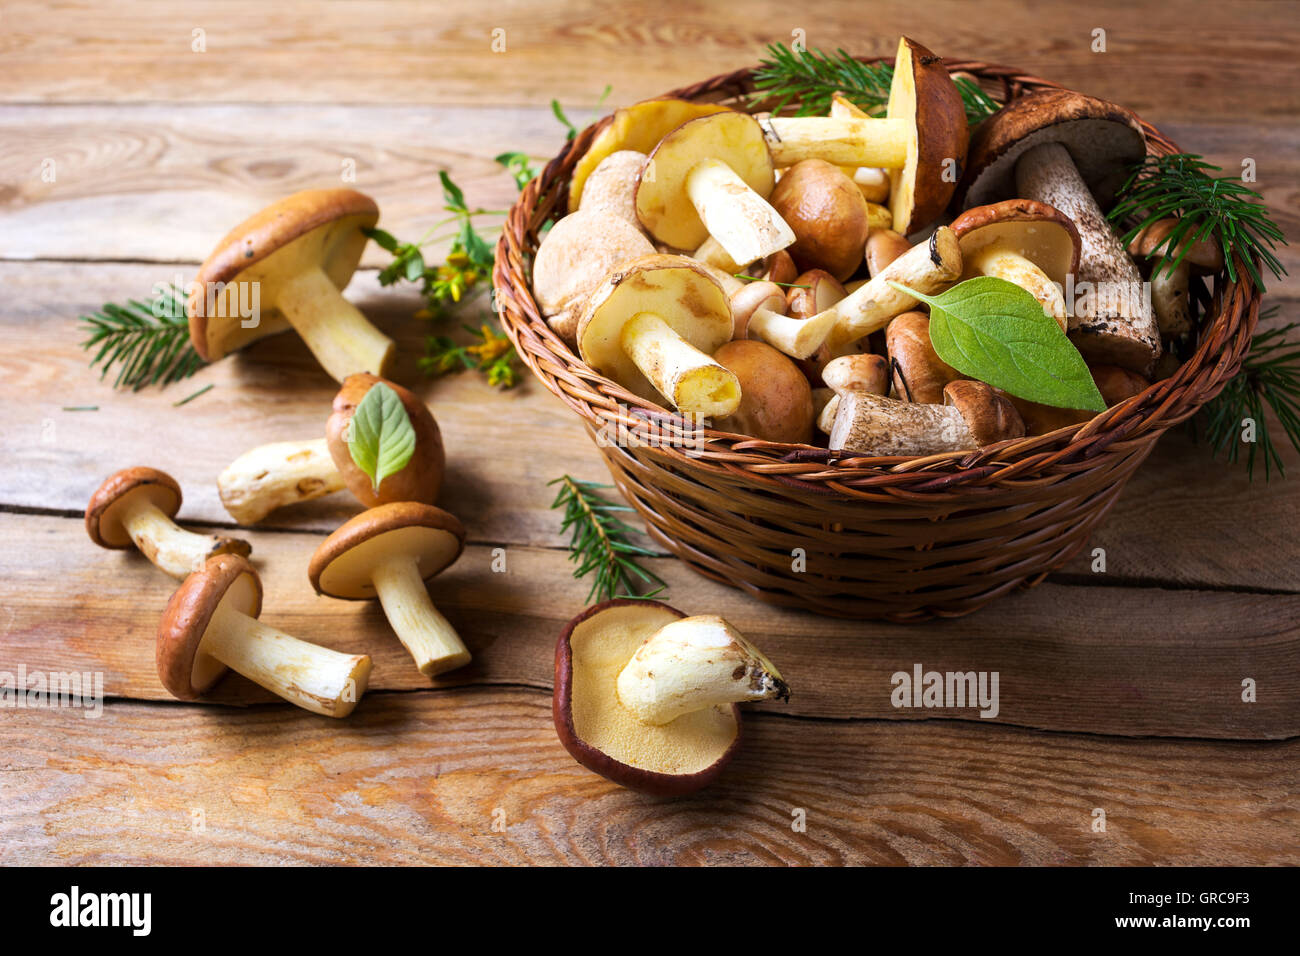 Forest picking mushrooms on the rustic wooden background. Fresh raw mushrooms on the table. Stock Photo